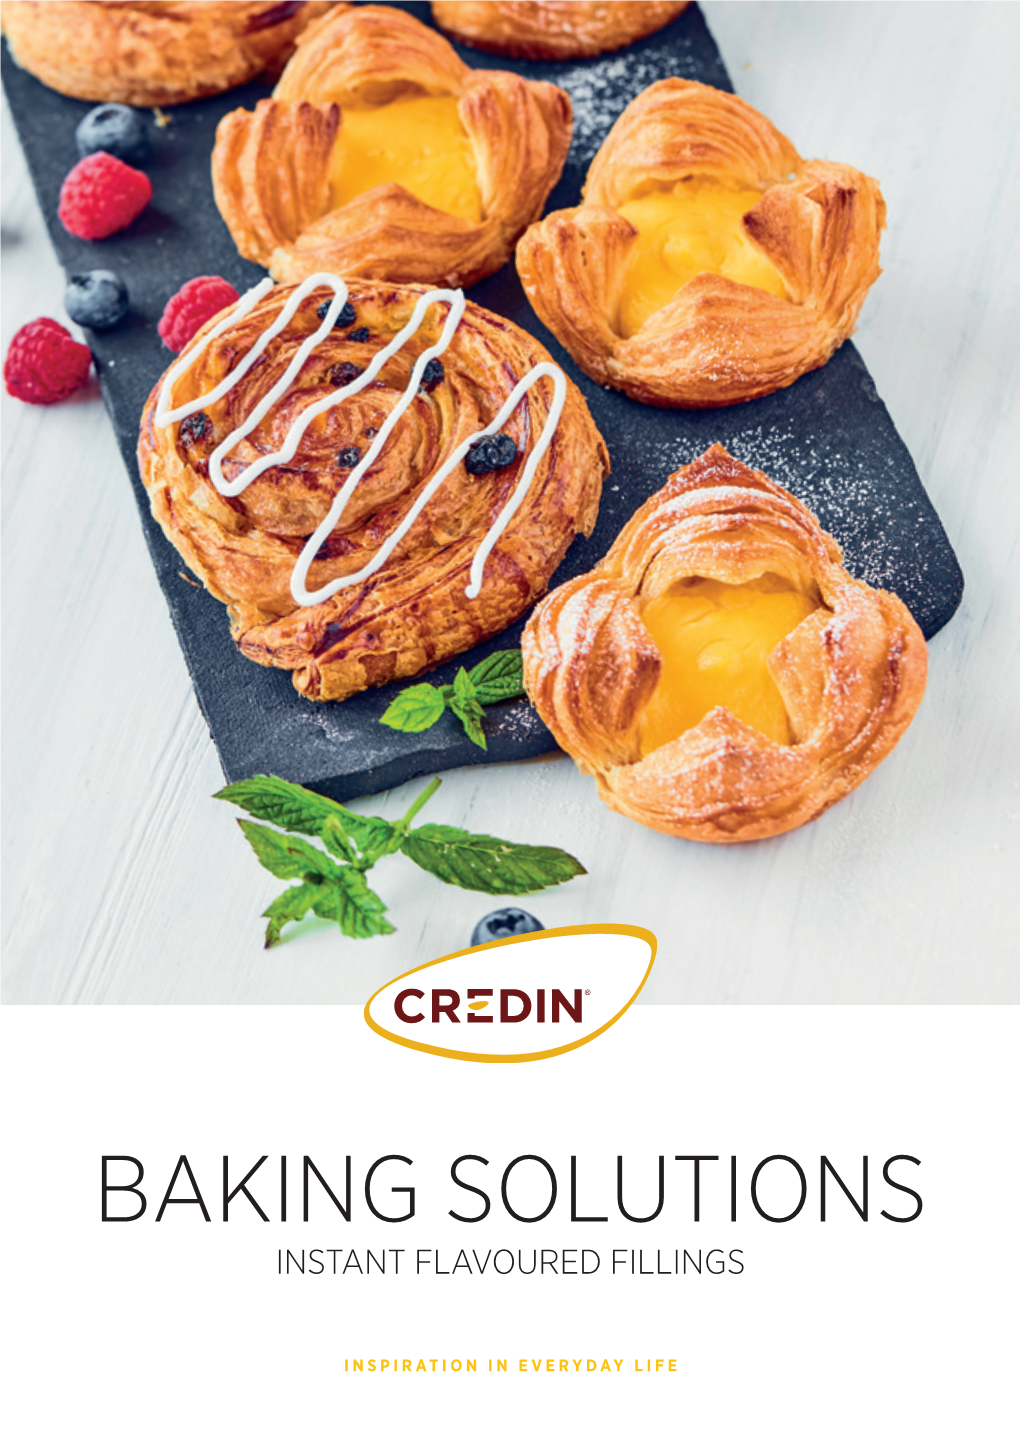 Baking Solutions Instant Flavoured Fillings